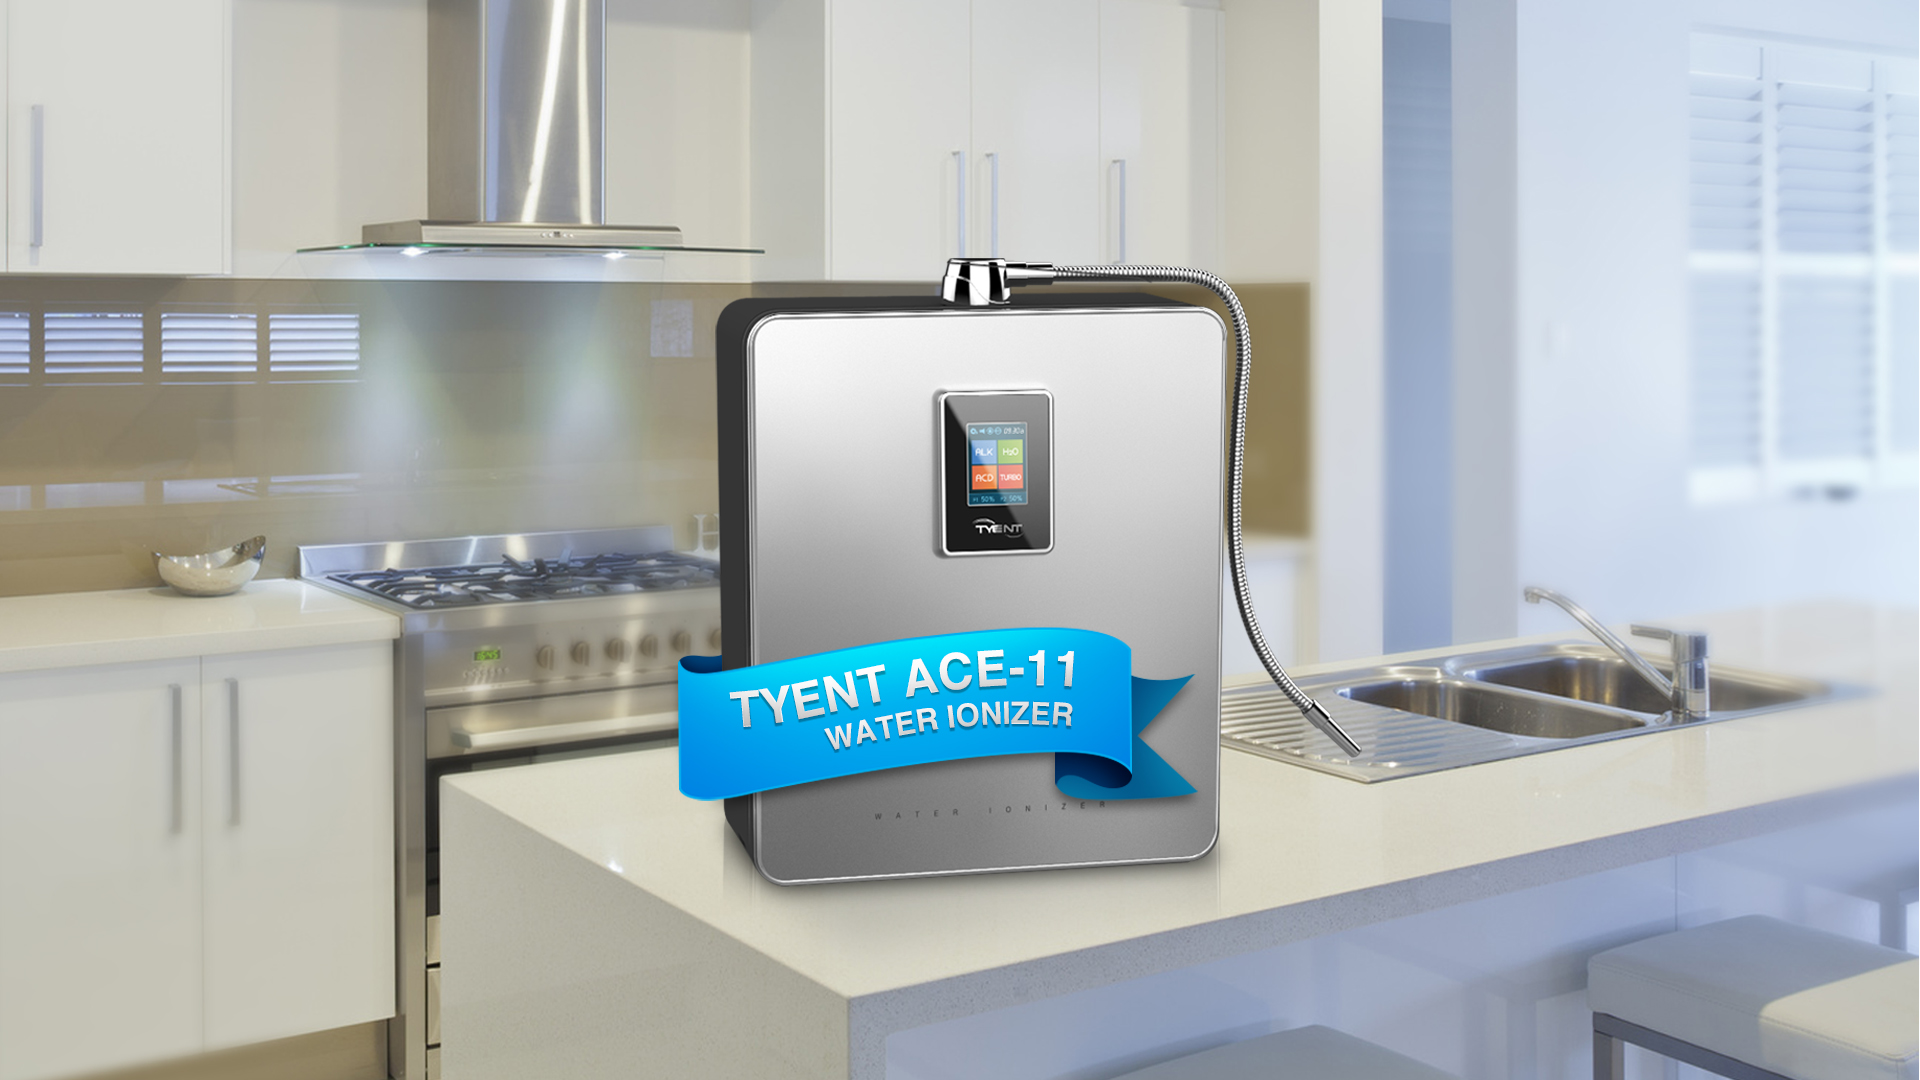 The Tyent Ace-11 water ionizer. Hydrogen water has never looked so good.